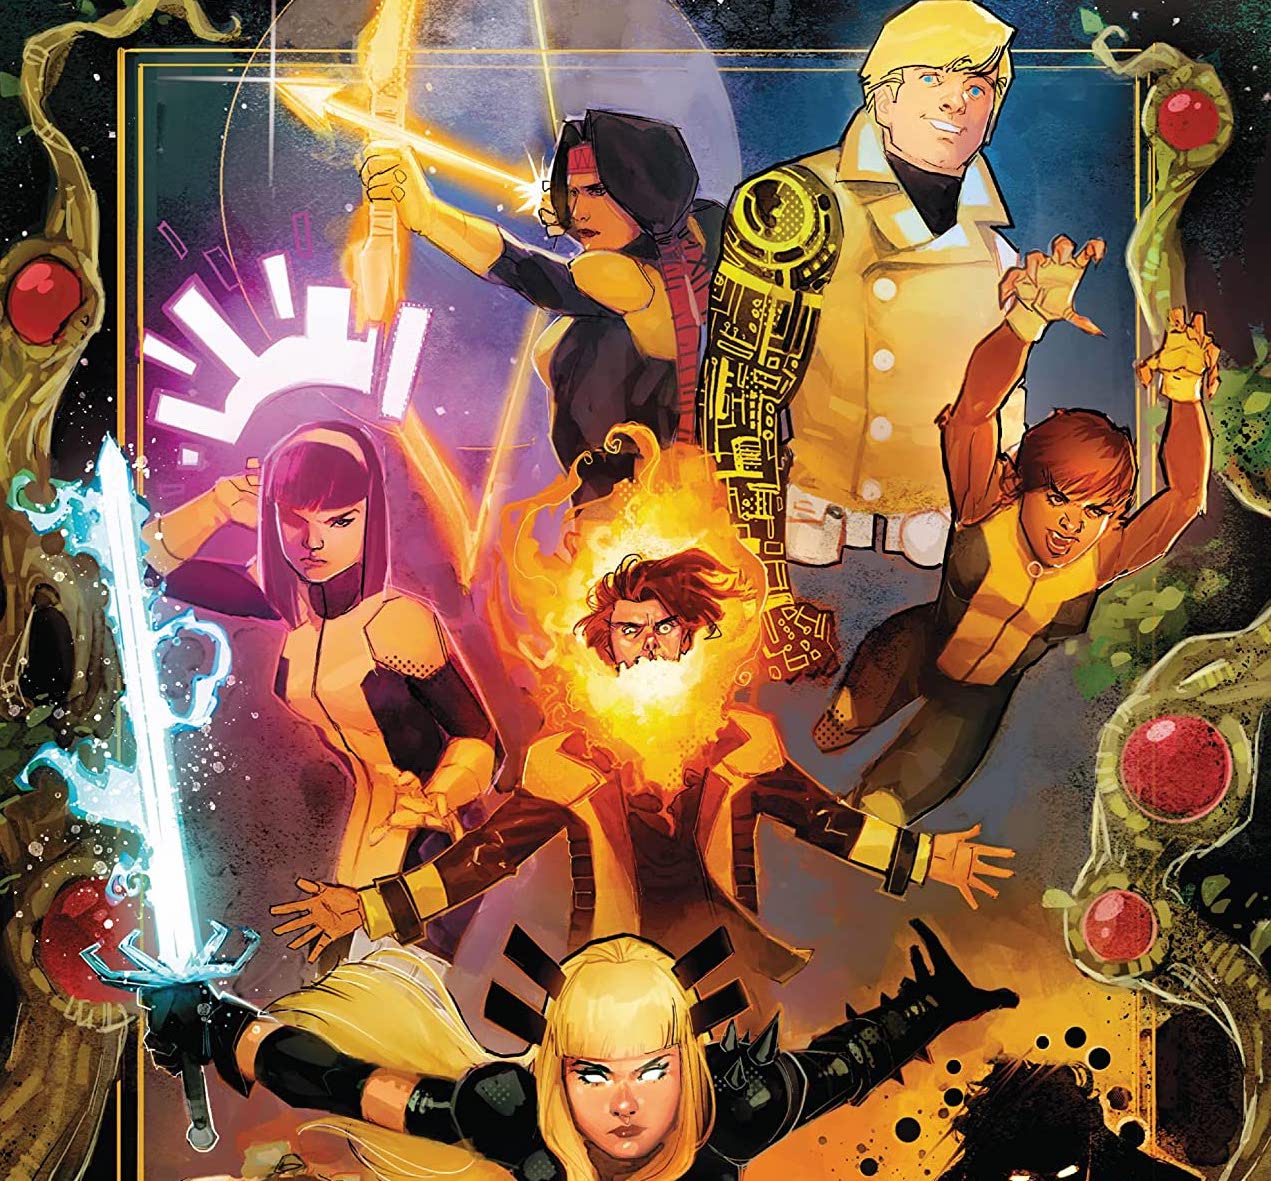 New Mutants by Jonathan Hickman Vol. 1 Review